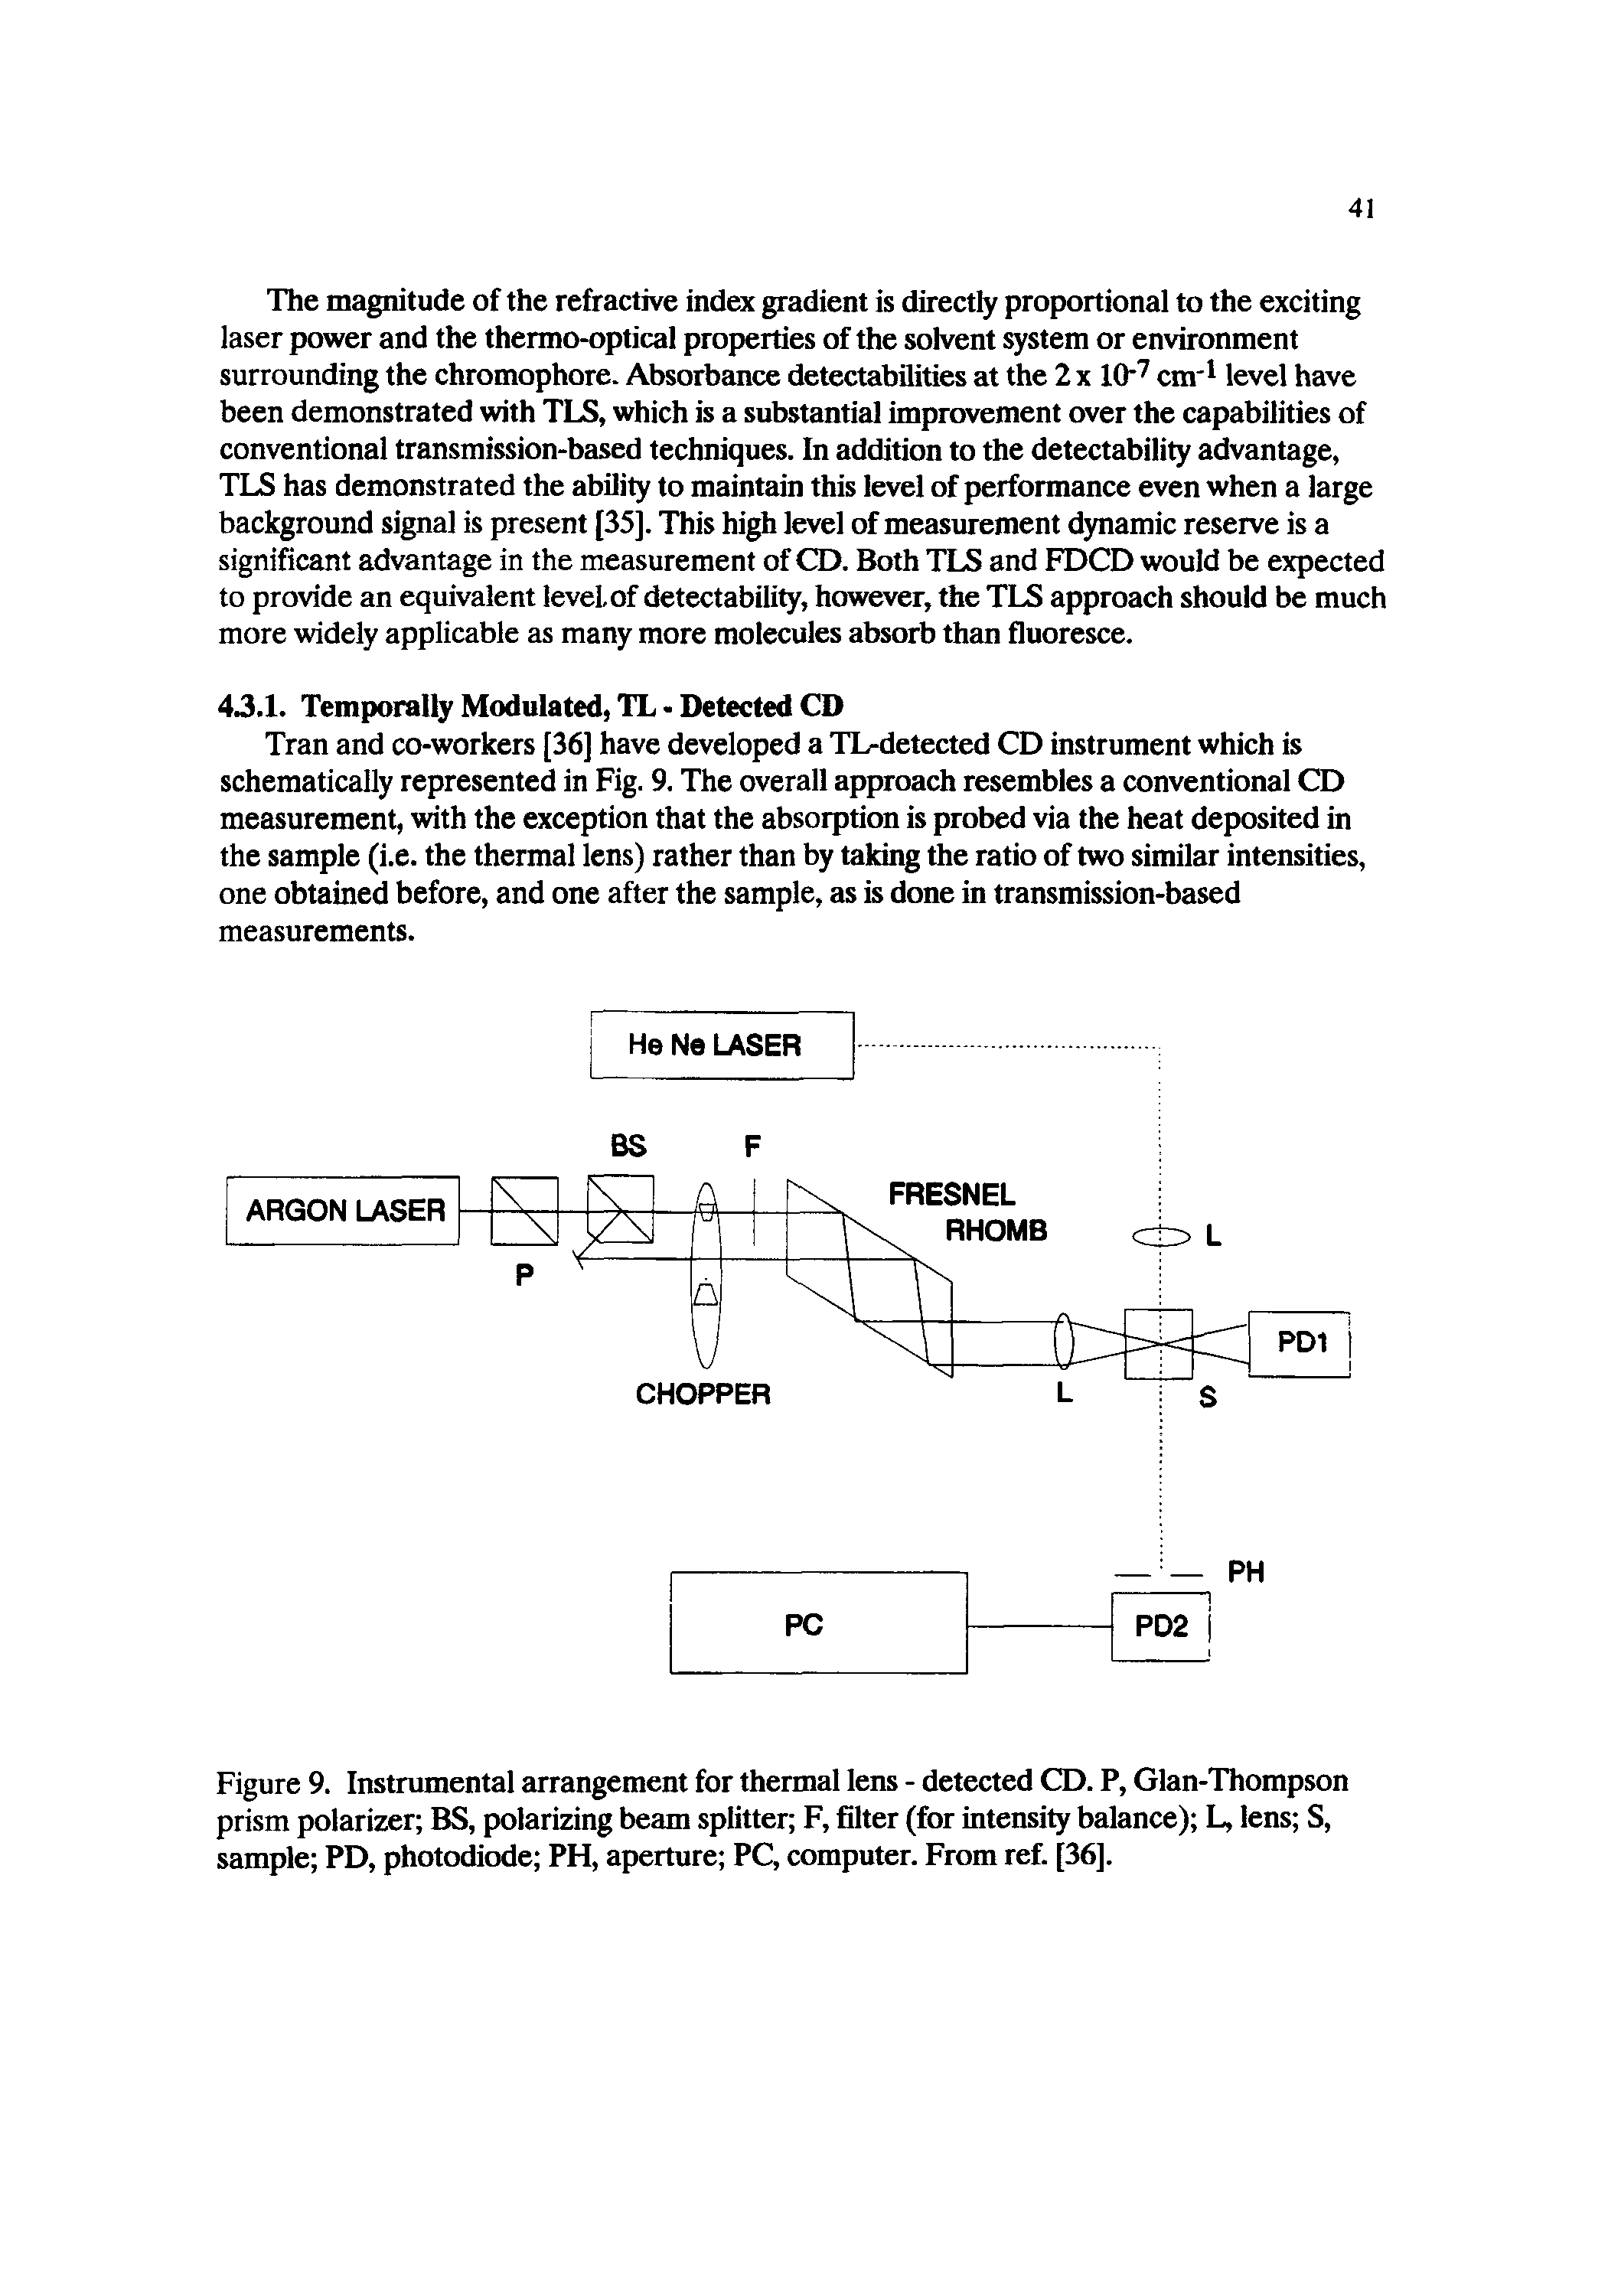 Figure 9. Instrumental arrangement for thermal lens - detected CD. P, Glan-Thompson prism polarizer BS, polarizing beam splitter F, filter (for intensity balance) L, lens S, sample PD, photodiode PH, aperture PC, computer. From ref. [36],...